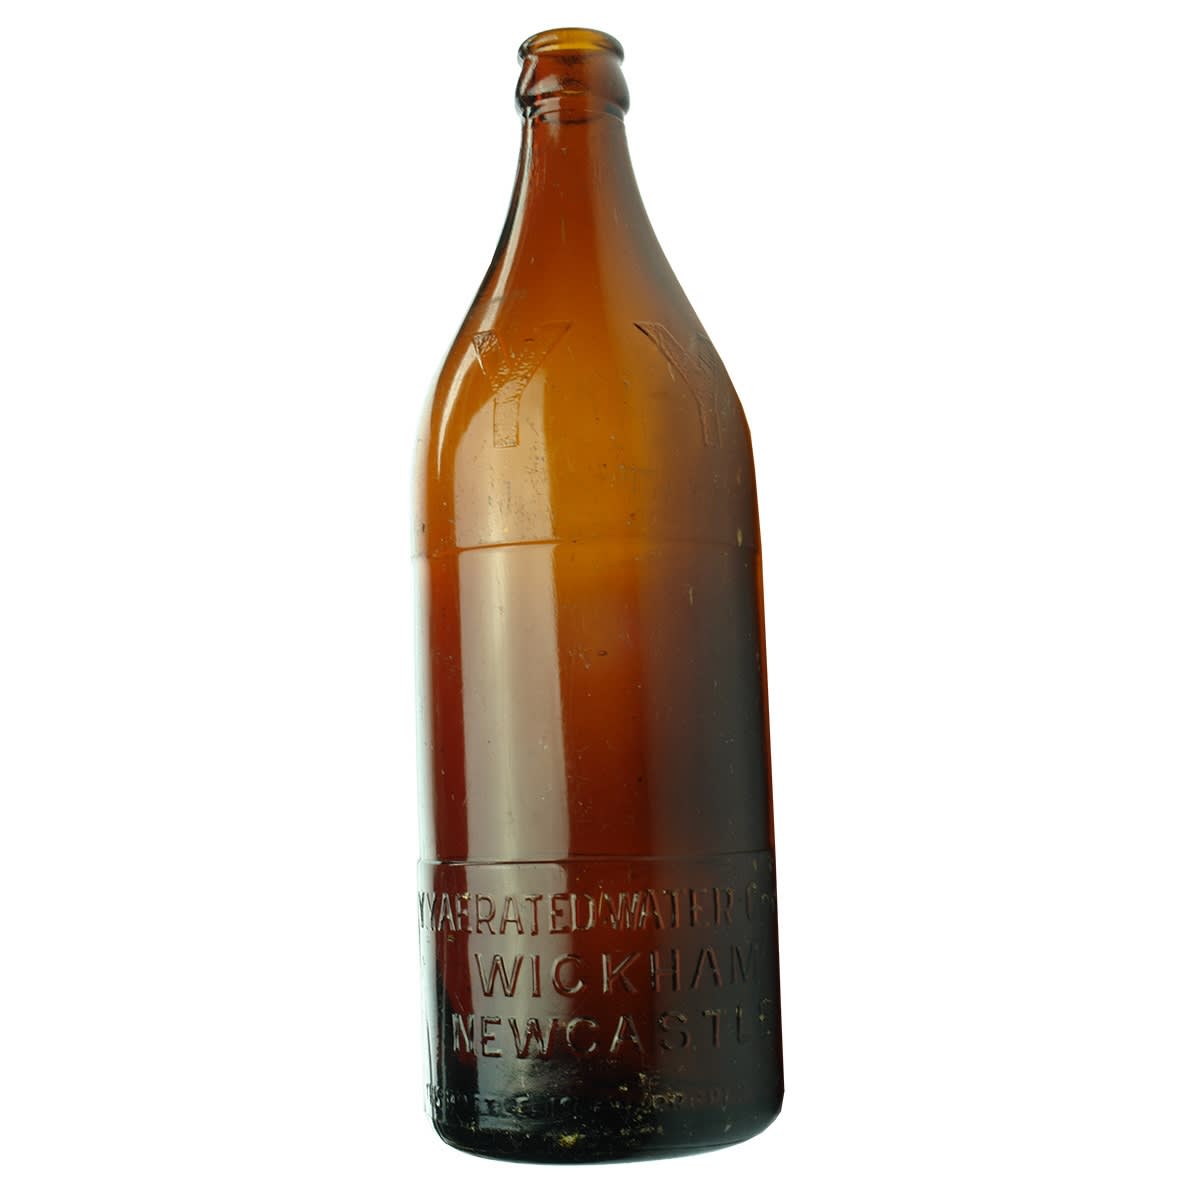 Crown Seal. YY Aerated Water Coy Ltd. Wickham. Newcastle. Amber. 24 oz. (New South Wales)